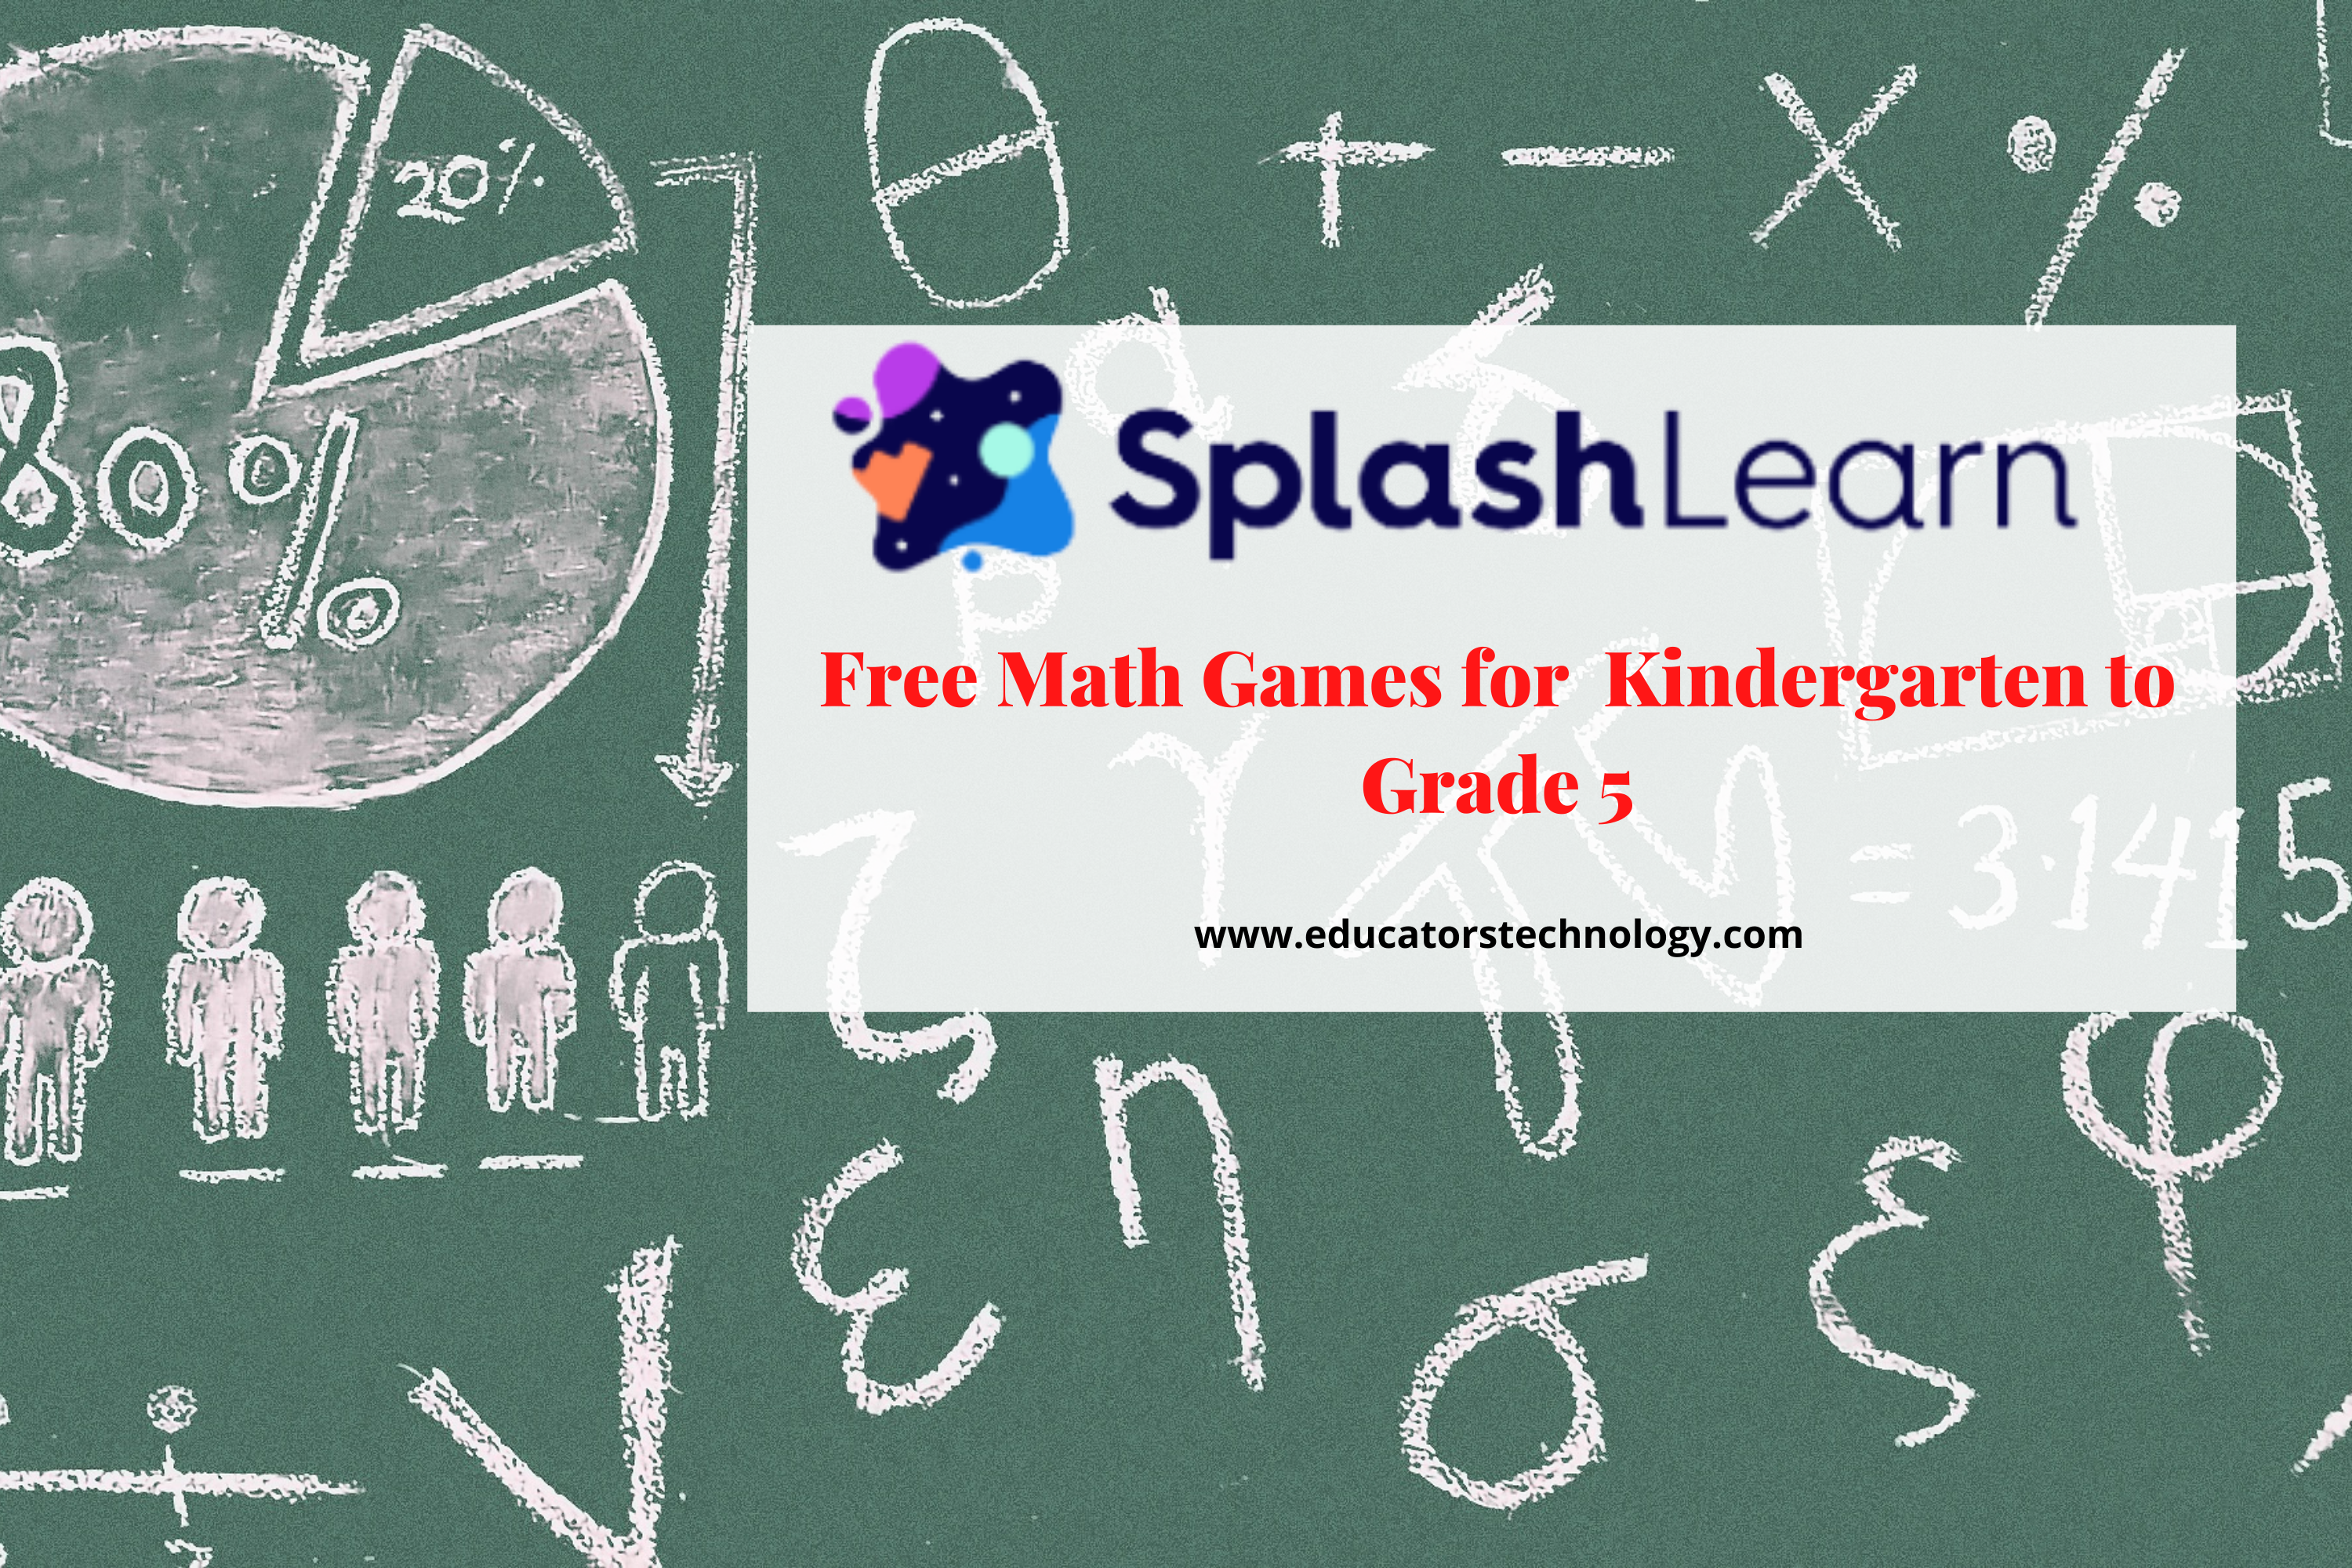 5 Math Games Every Classroom Needs to Play